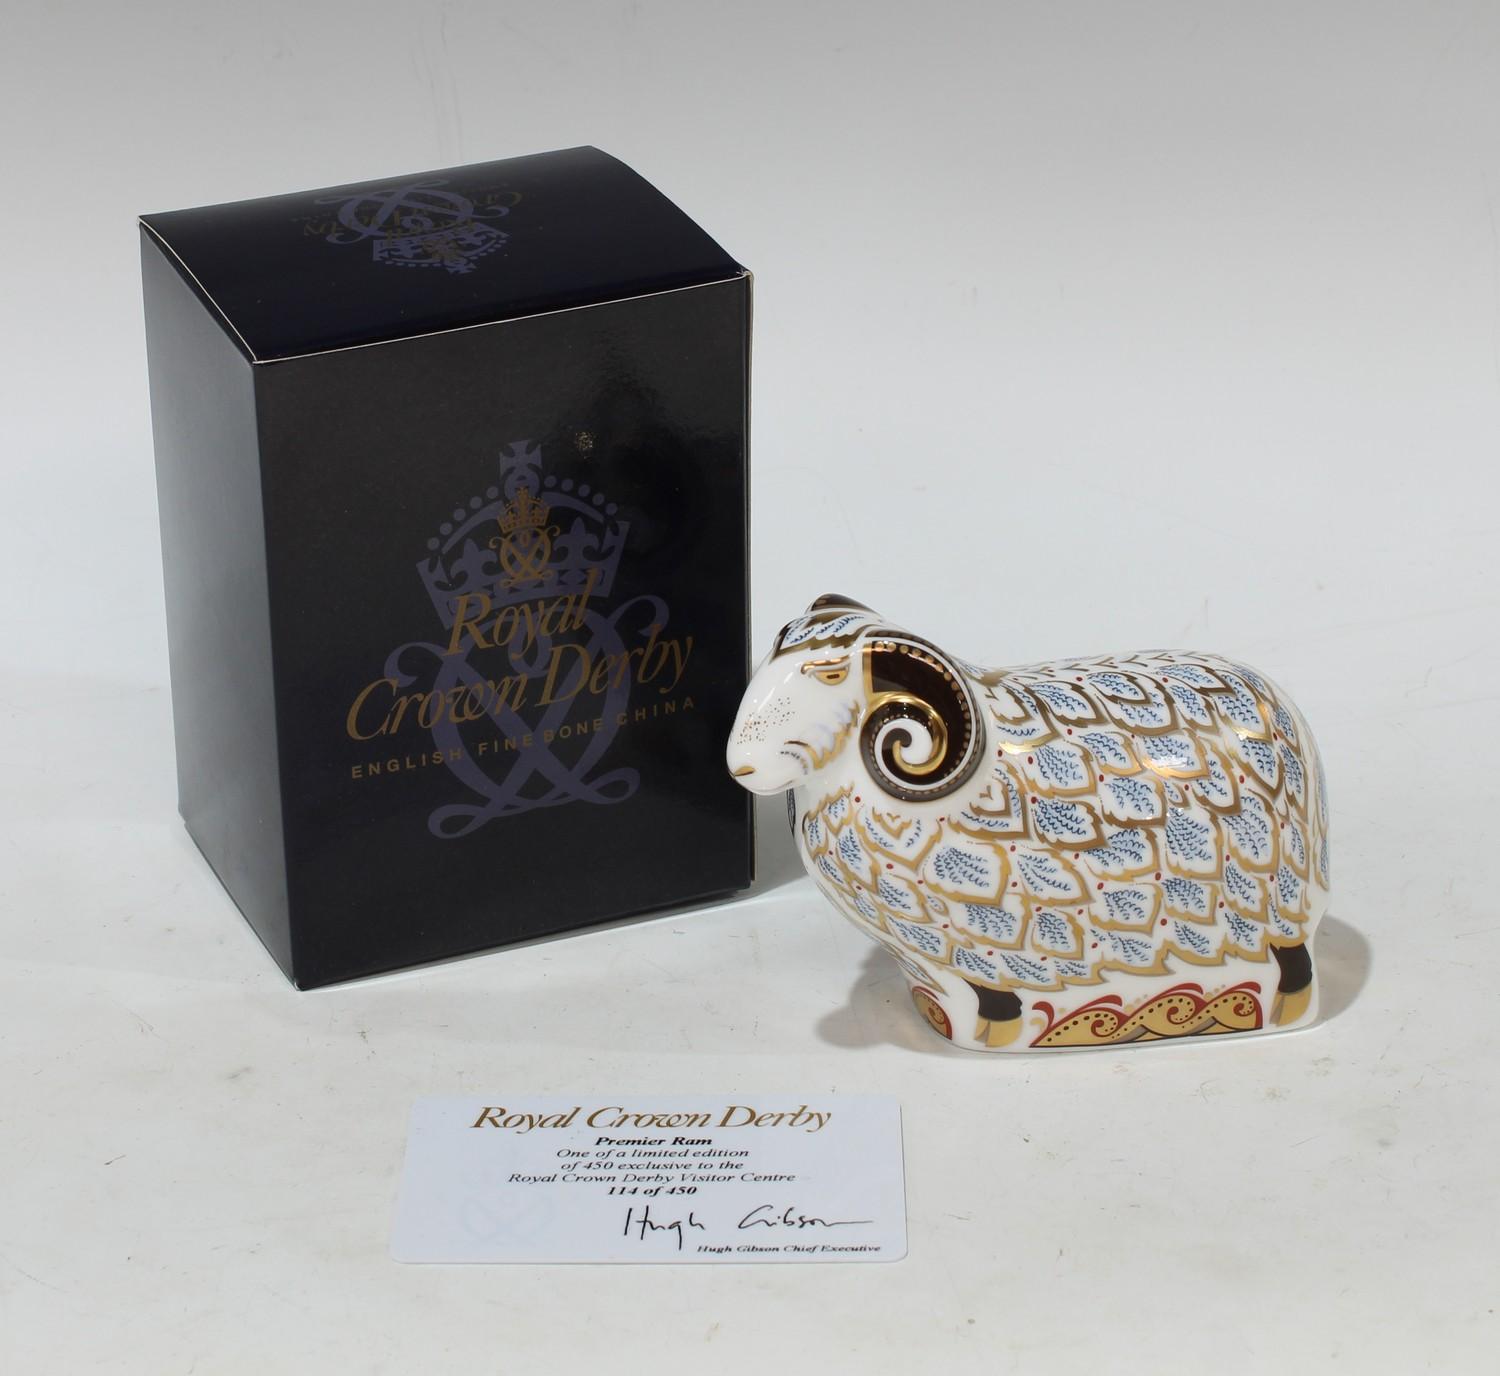 A Royal Crown Derby paperweight, Premier Ram, Visitor Centre exclusive, gold stopper, John Ablitt